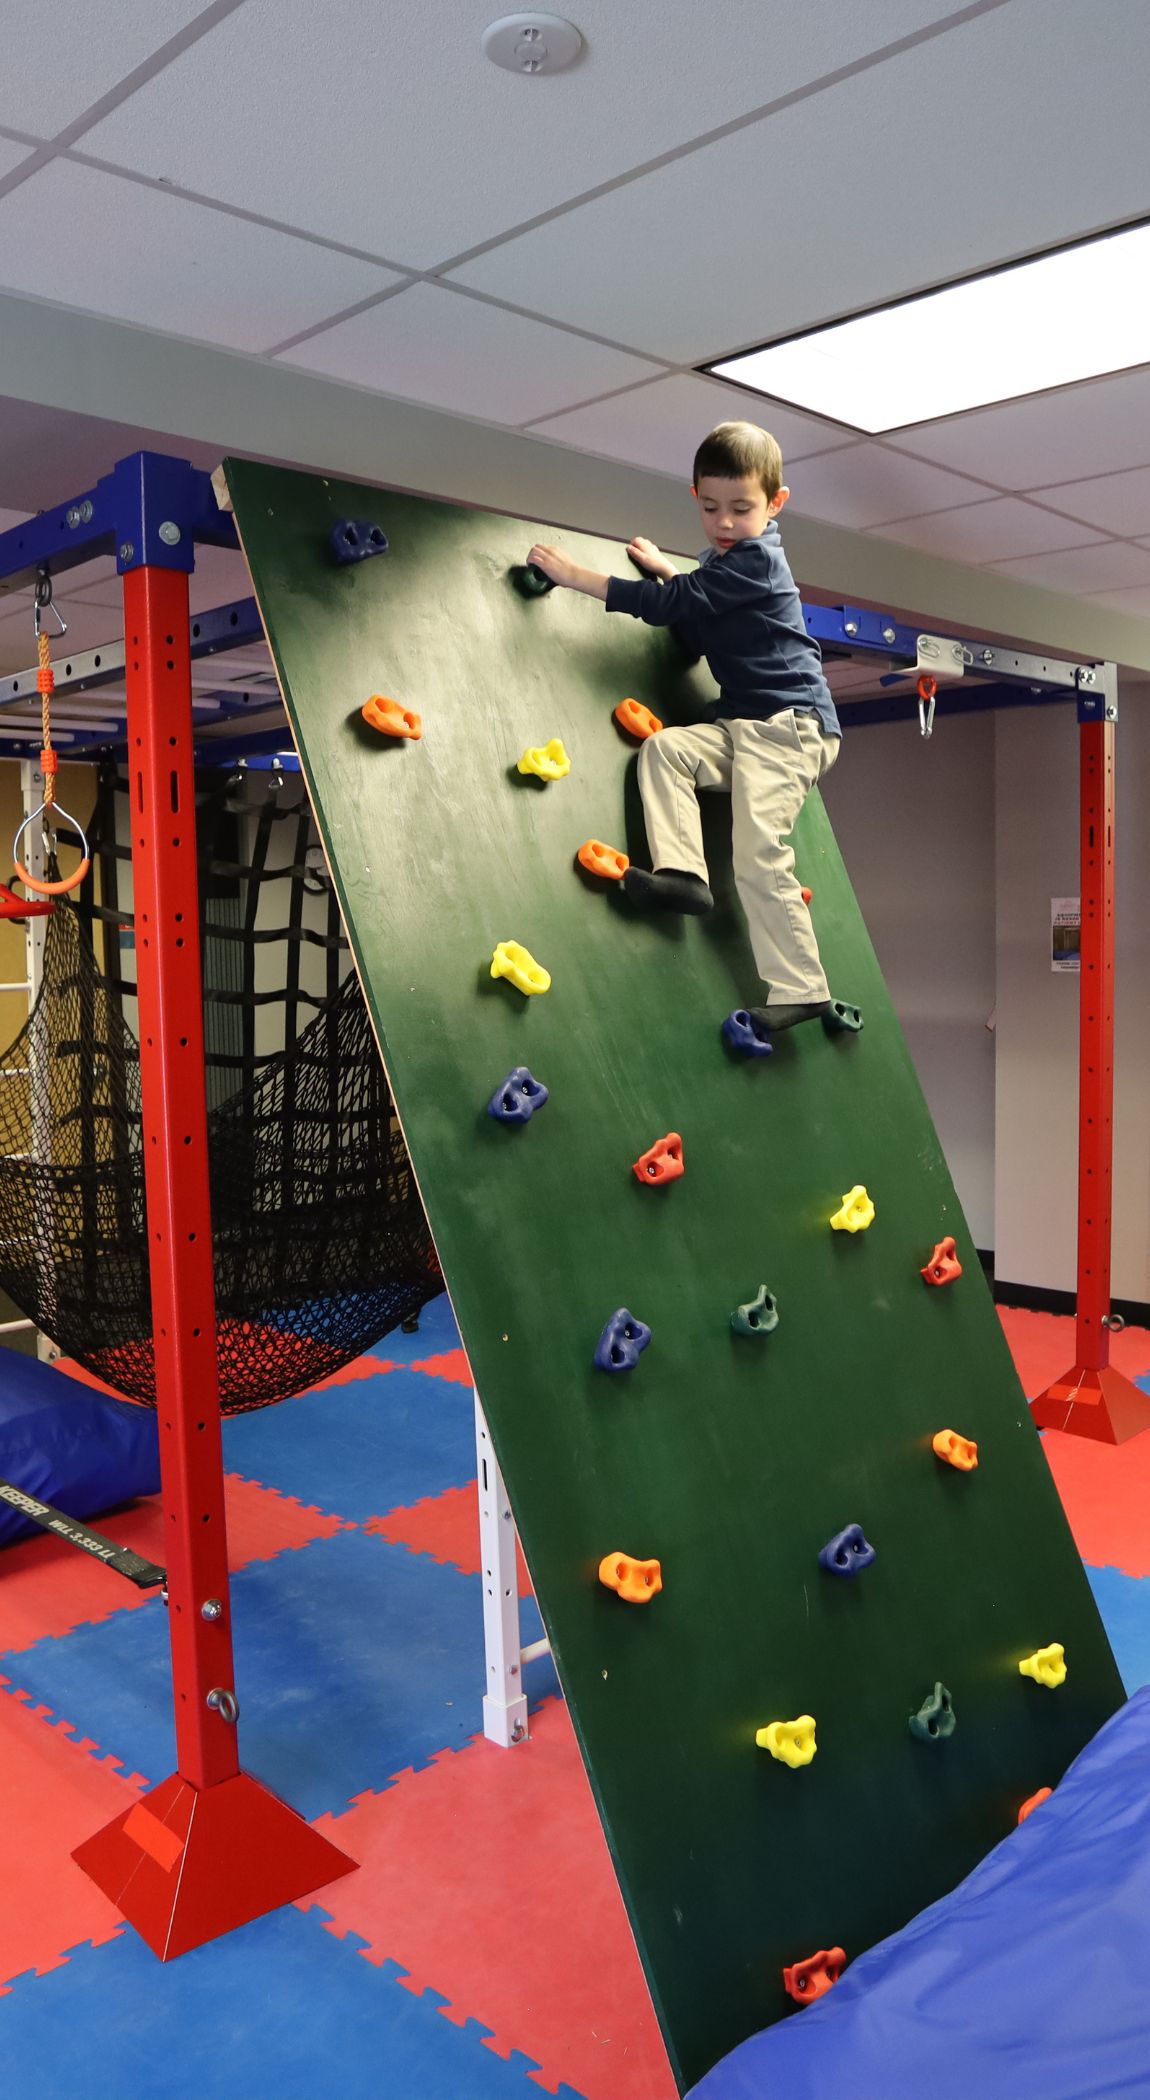 Top Home Sensory Room Equipment If you've ever visited an Occupational  Therapy gym (like the ones pictured above), you would see…